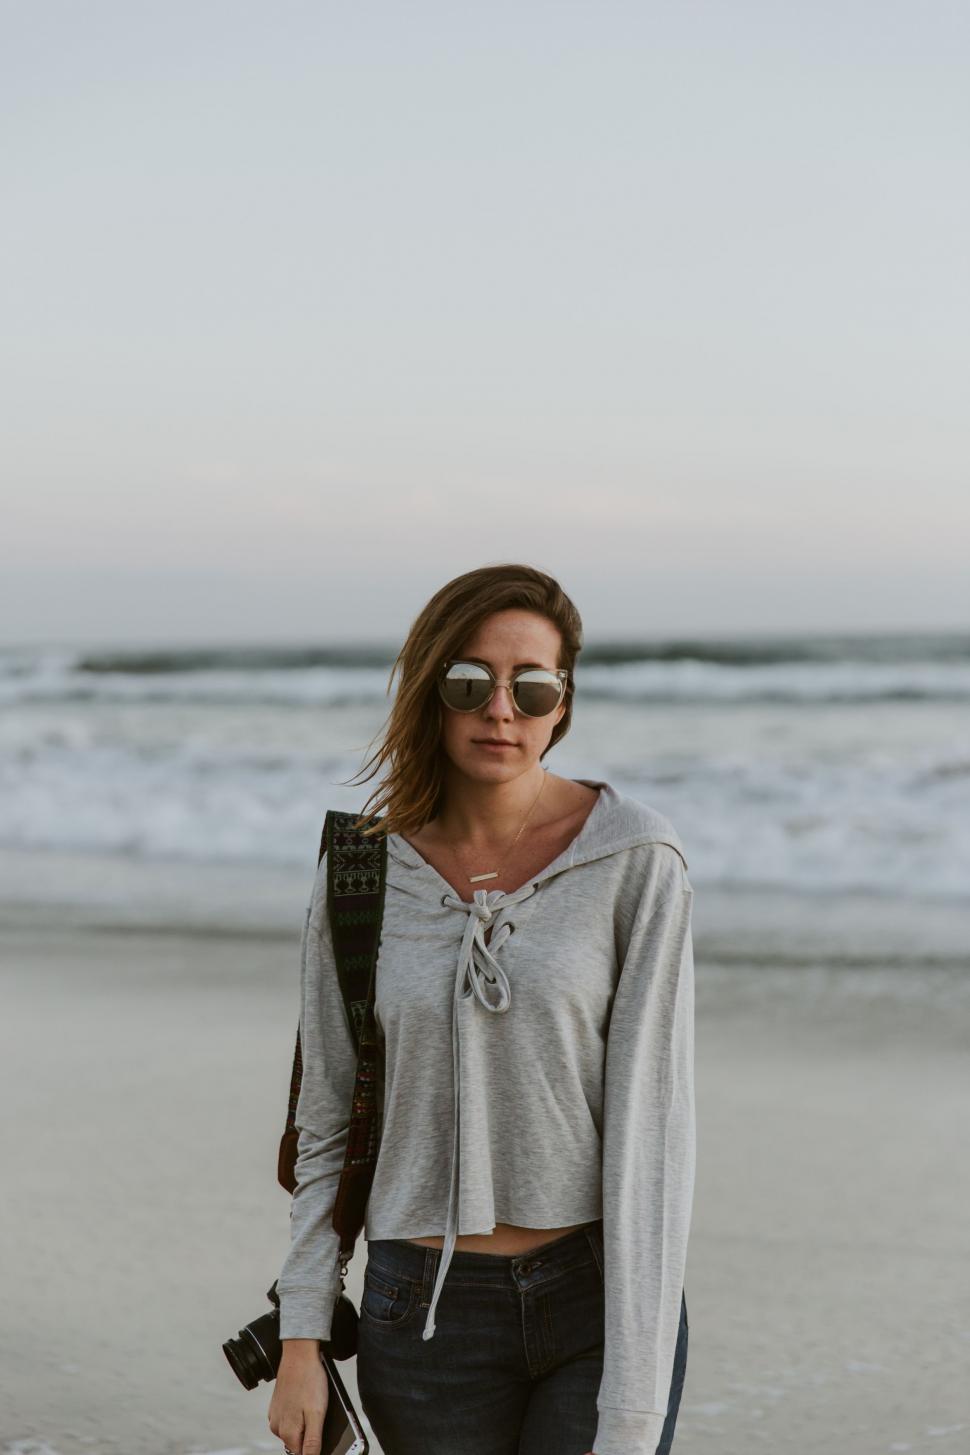 Free Image of Woman Standing on Beach With Camera 